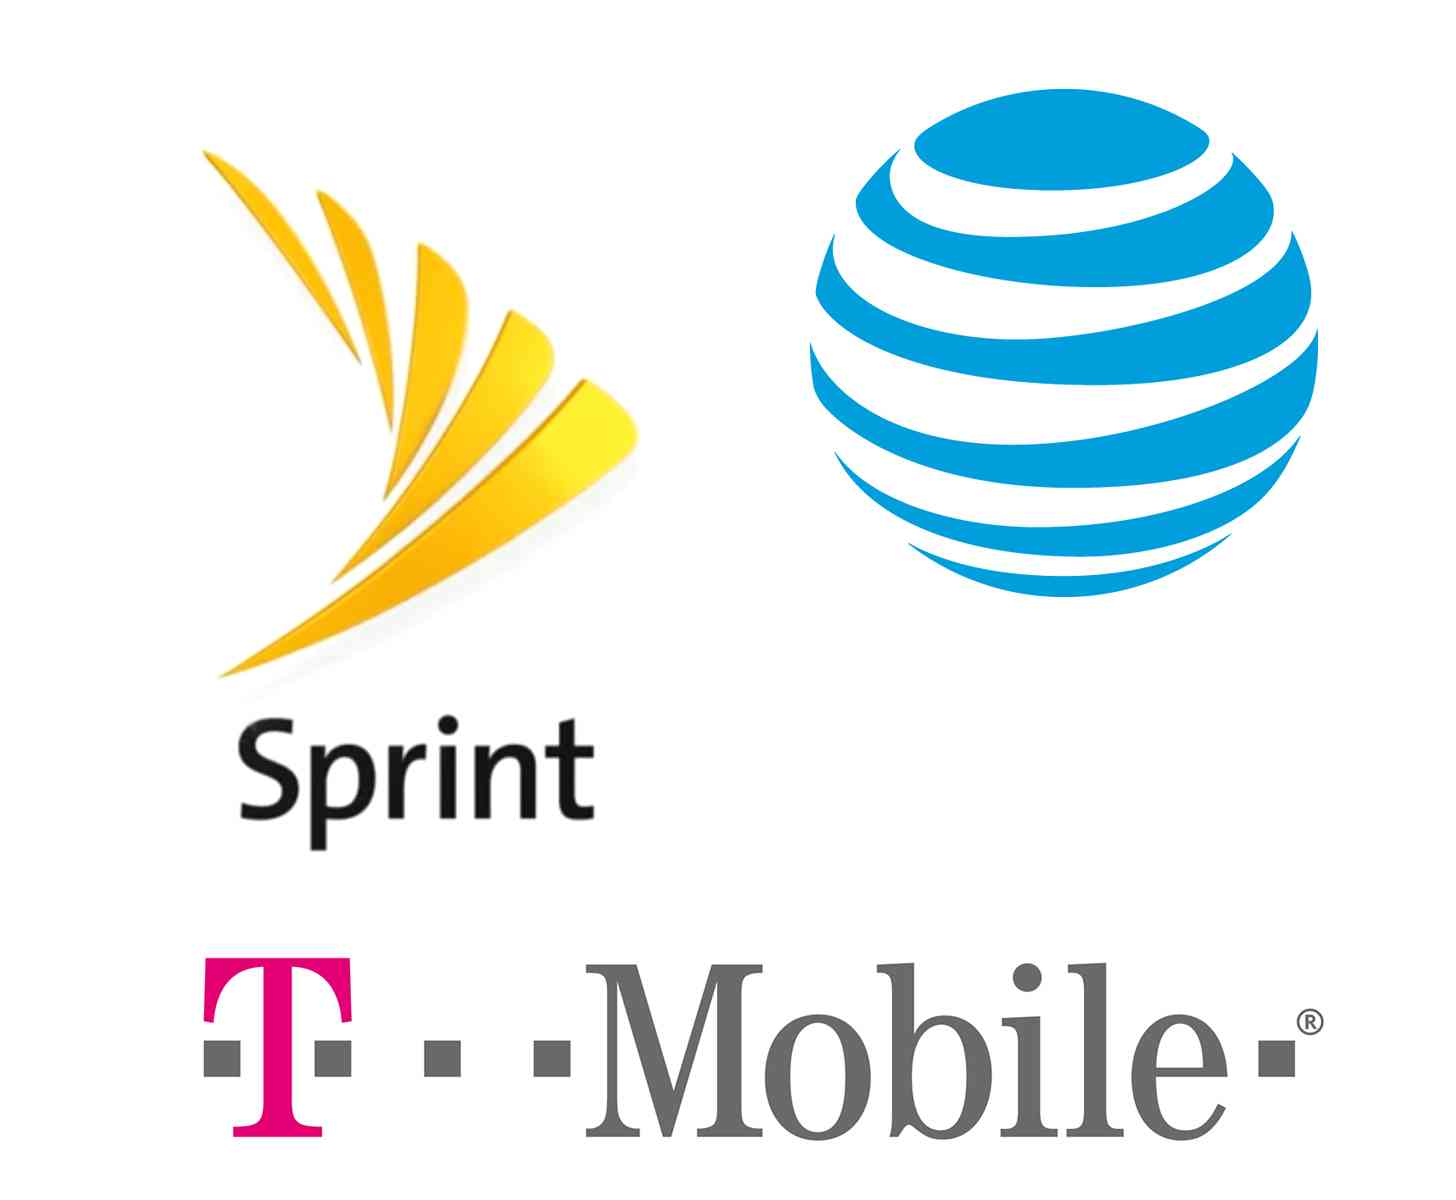 AT&T, Sprint, T-Mobile logos